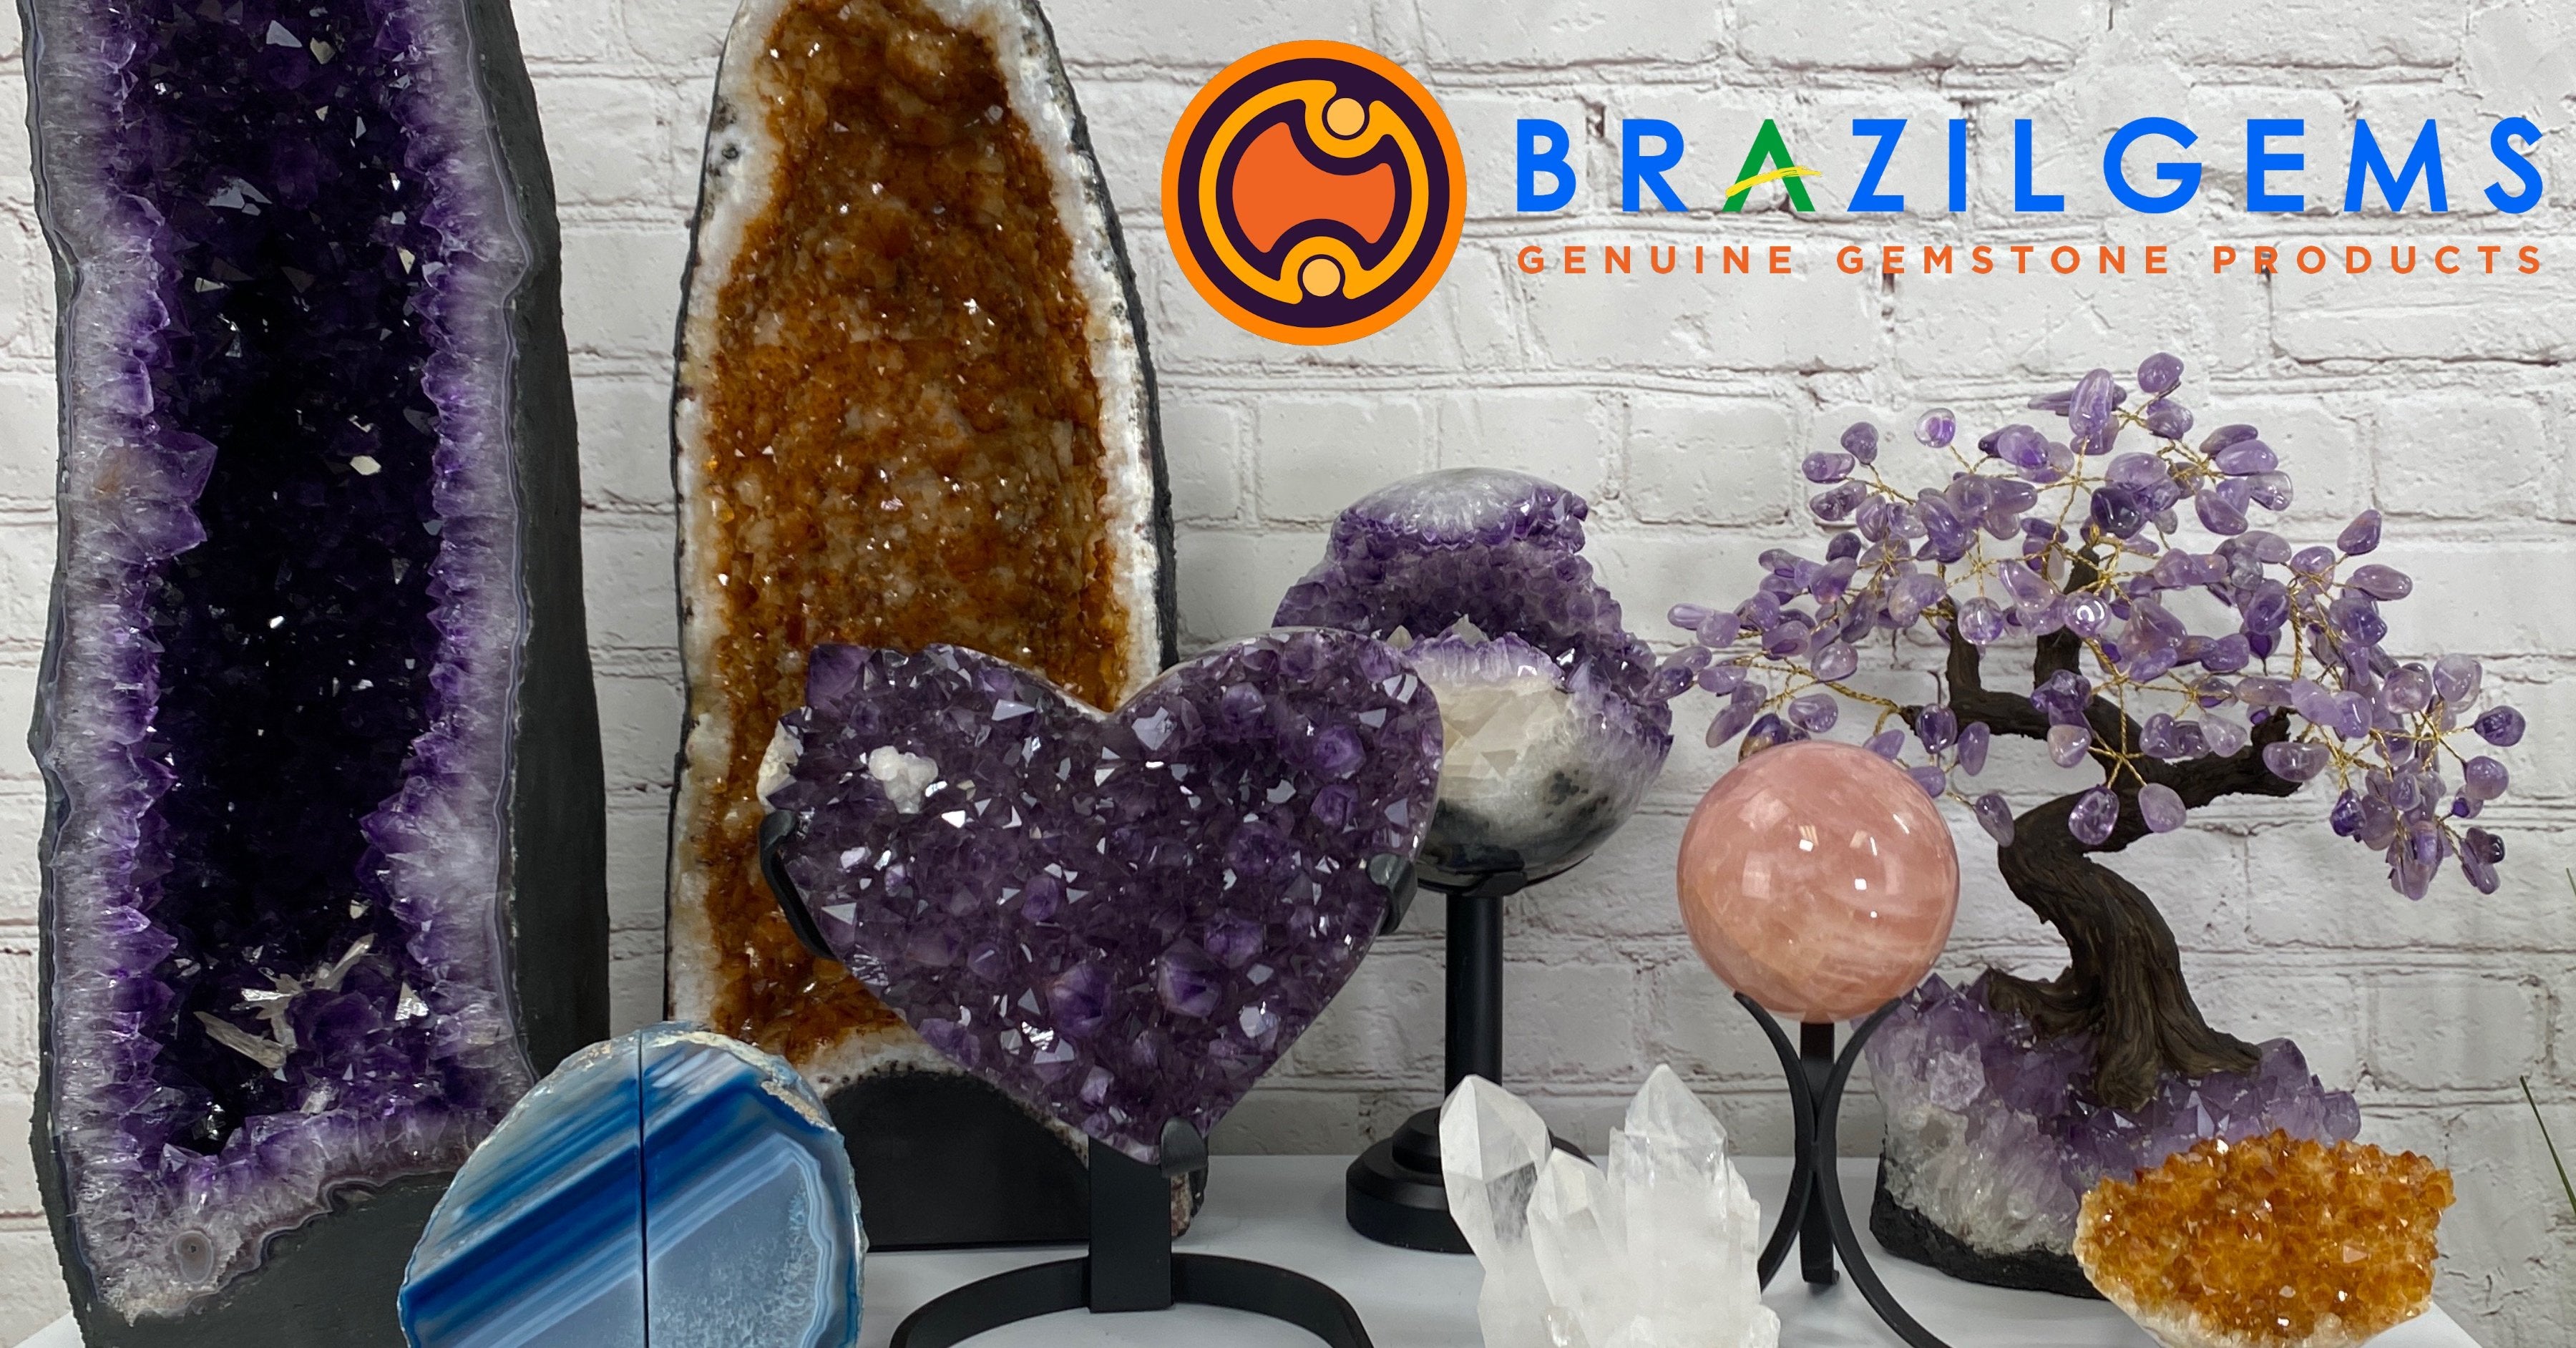 Everything You Need Know About Brazilian Gemstones